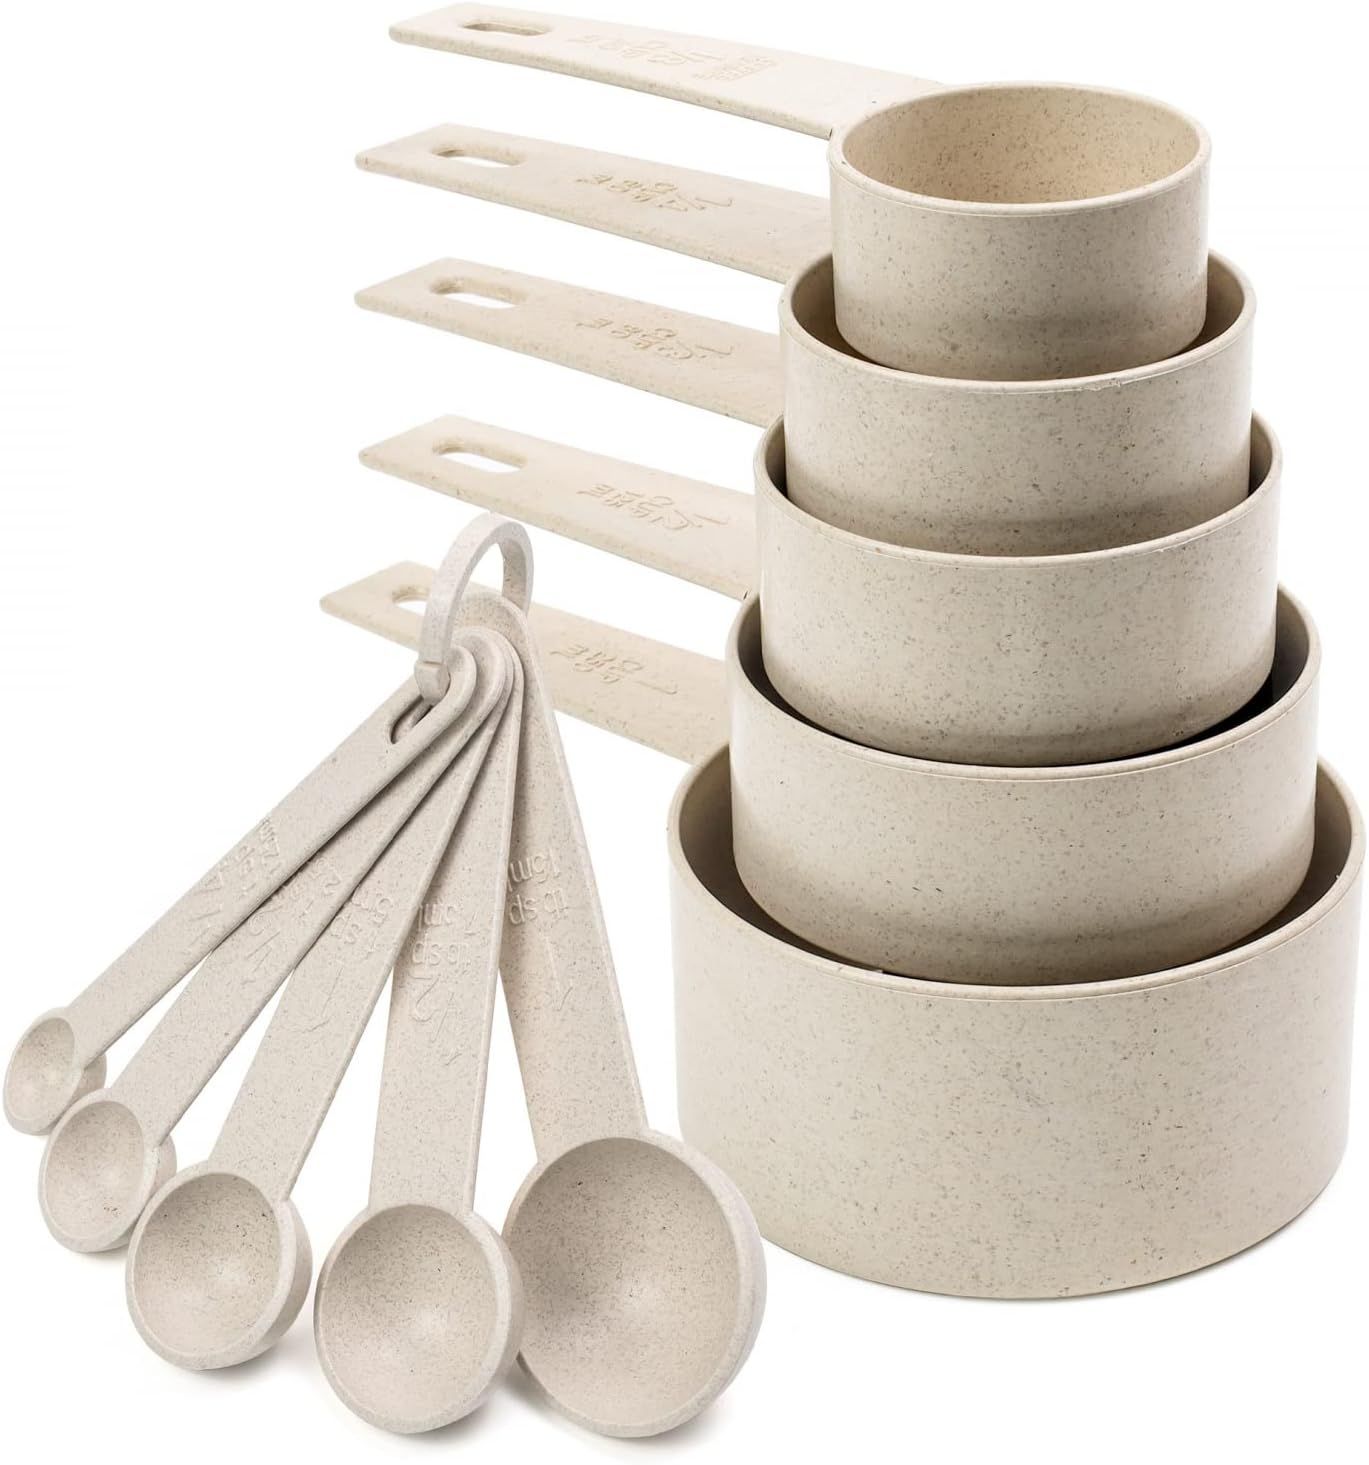 Beille Cream Wheat Straw Measuring Cups Spoons Set Cooking Baking Tools 10pc | Amazon (US)